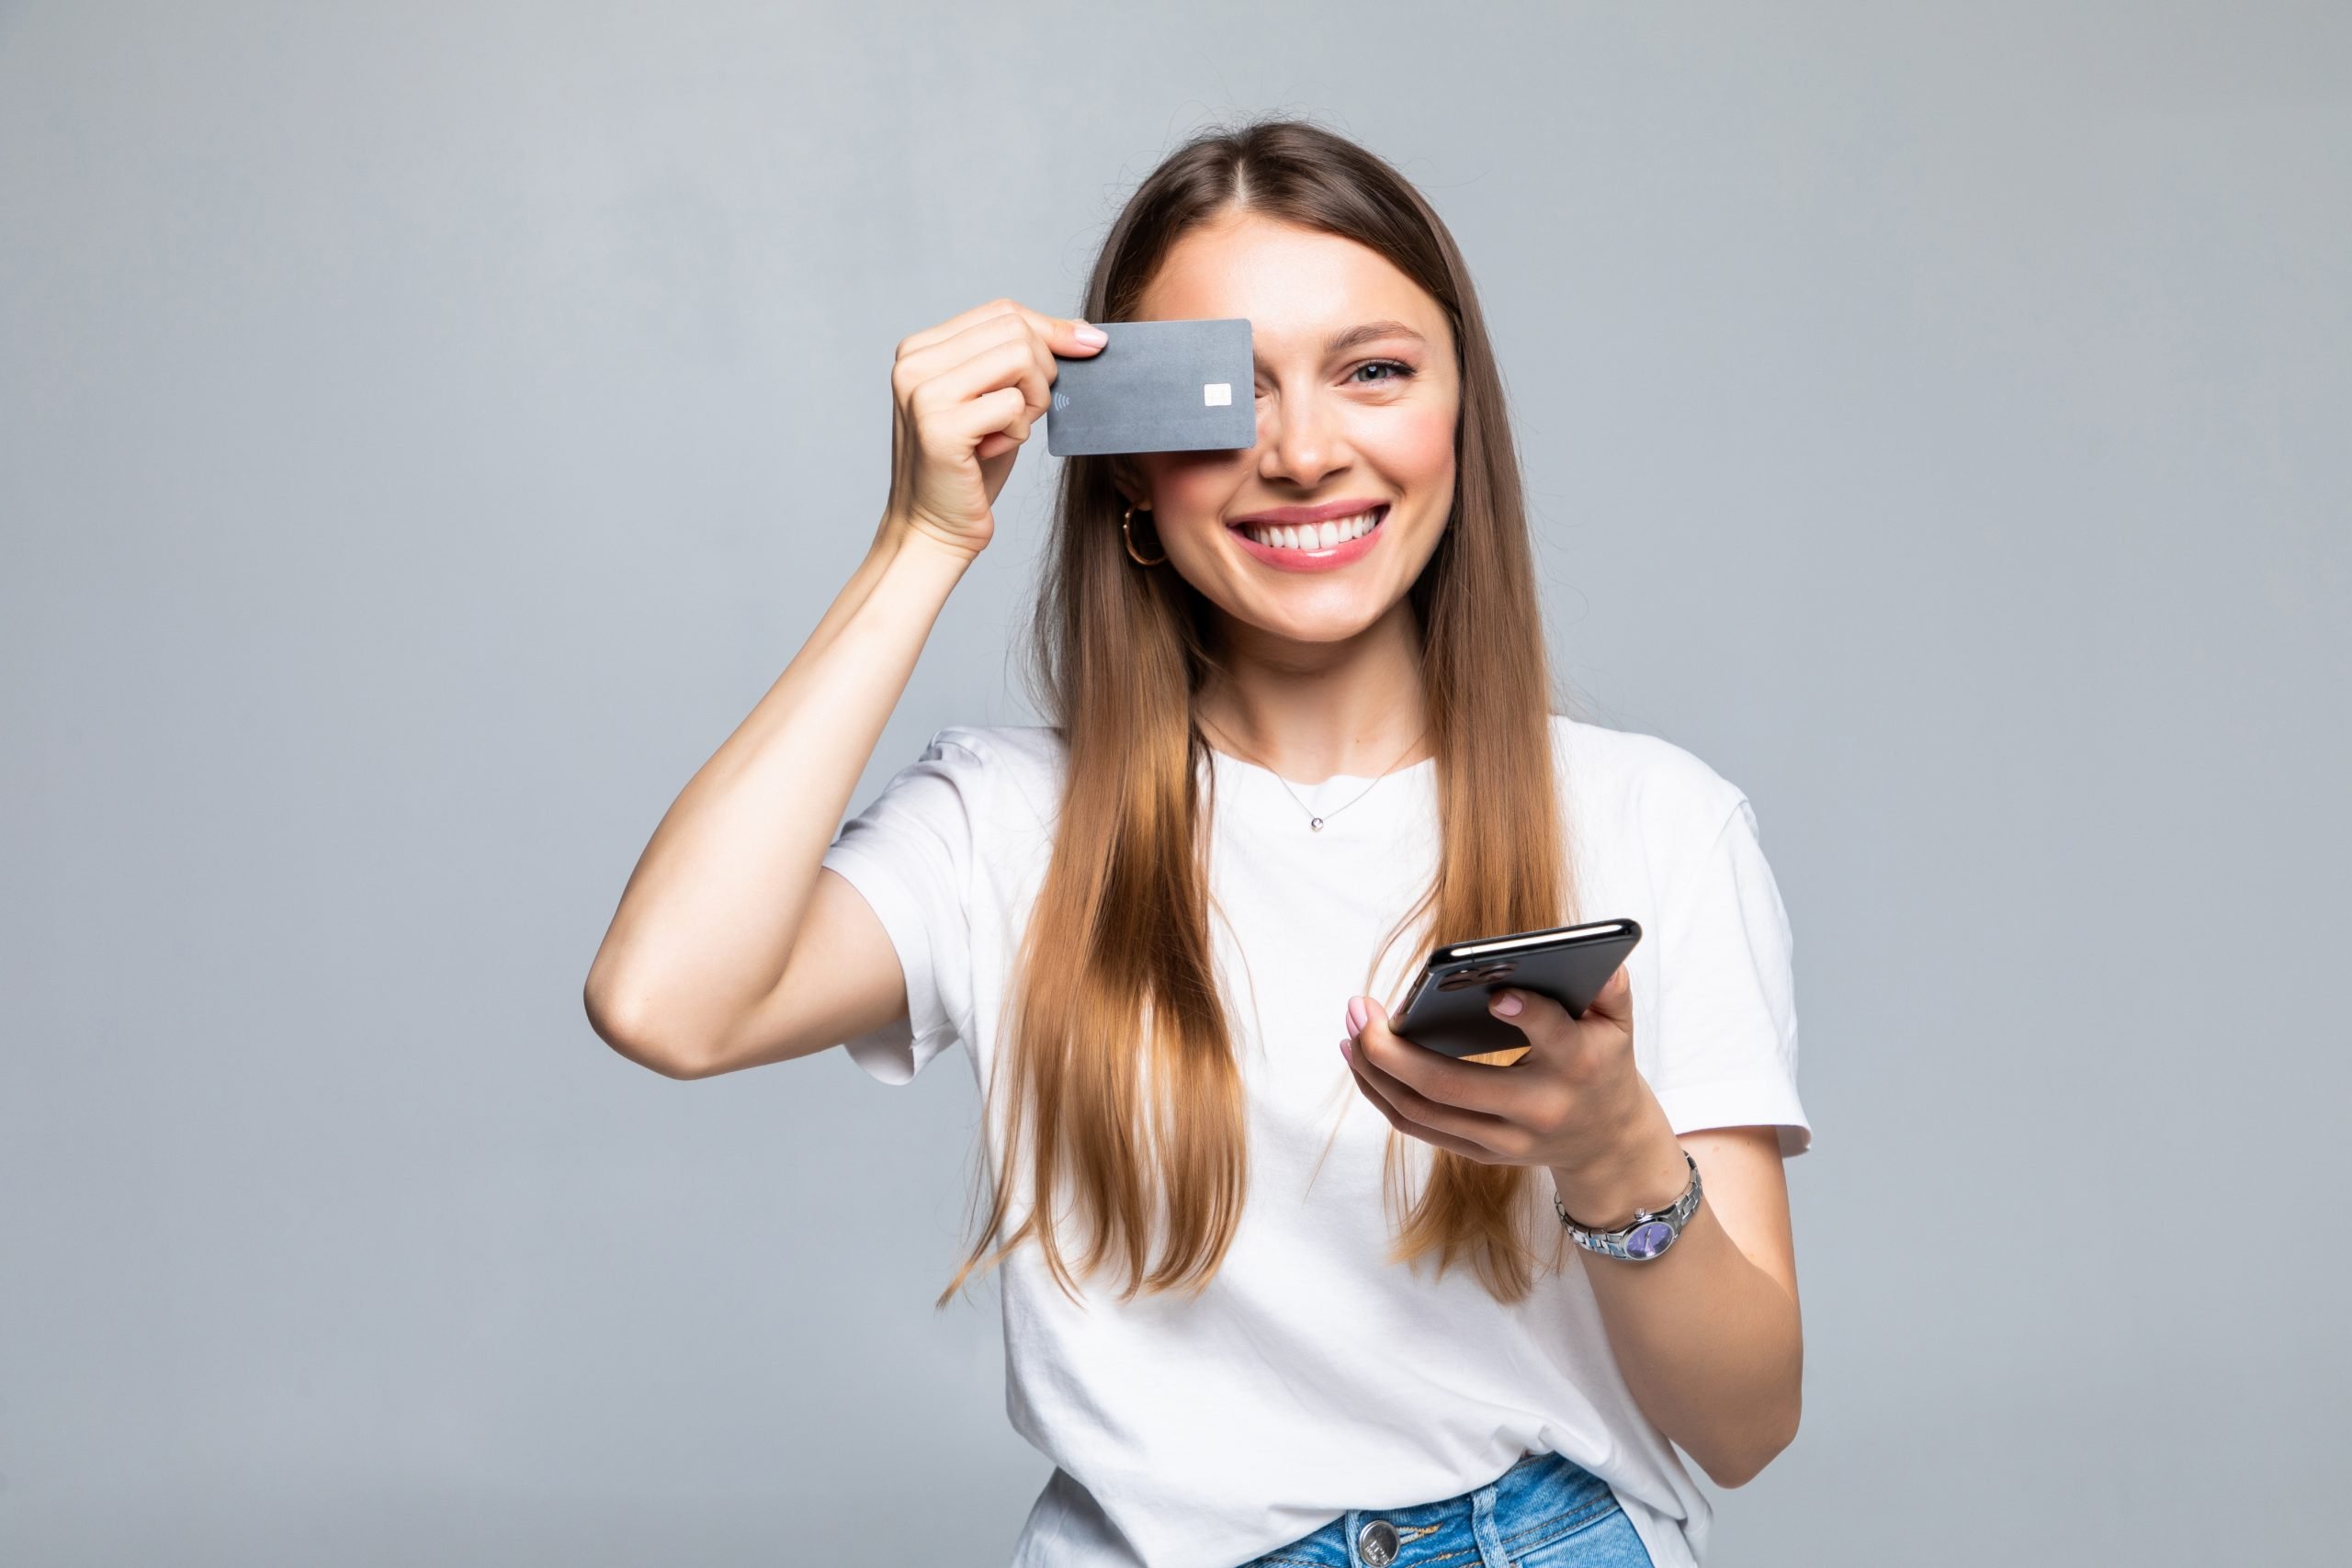 Cheerful excited young woman with mobile phone and credit card over white background